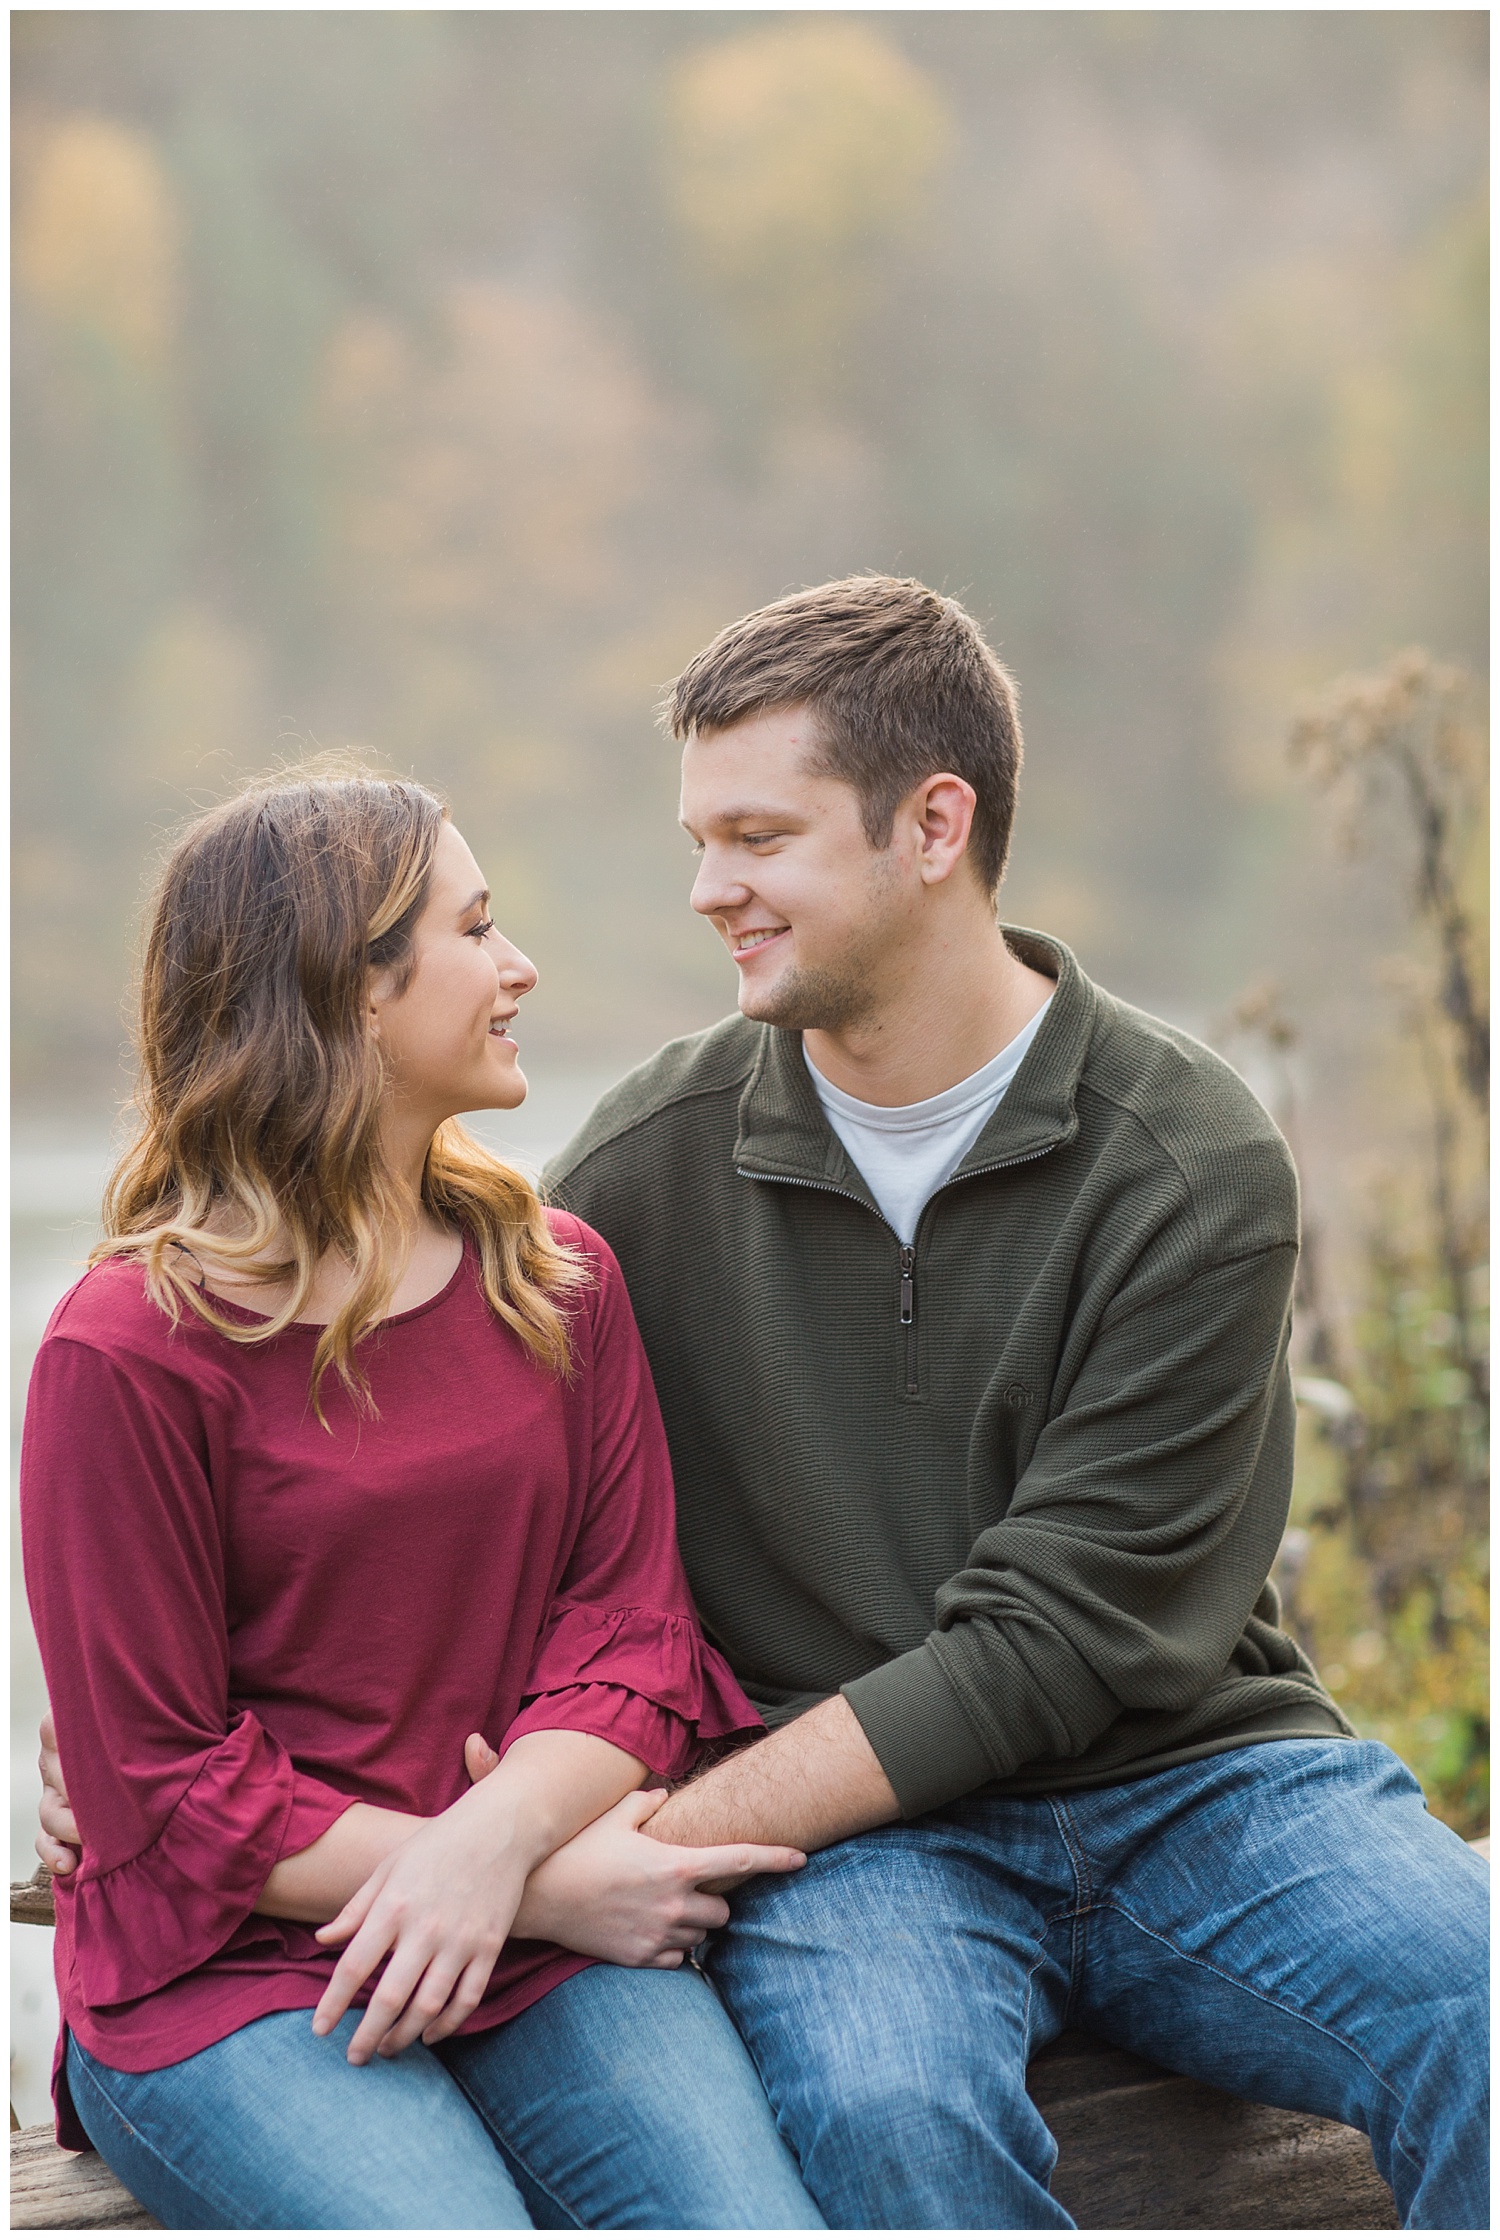 Couples session - Letchworth state park - Lass & Beau -180_Buffalo wedding photography.jpg